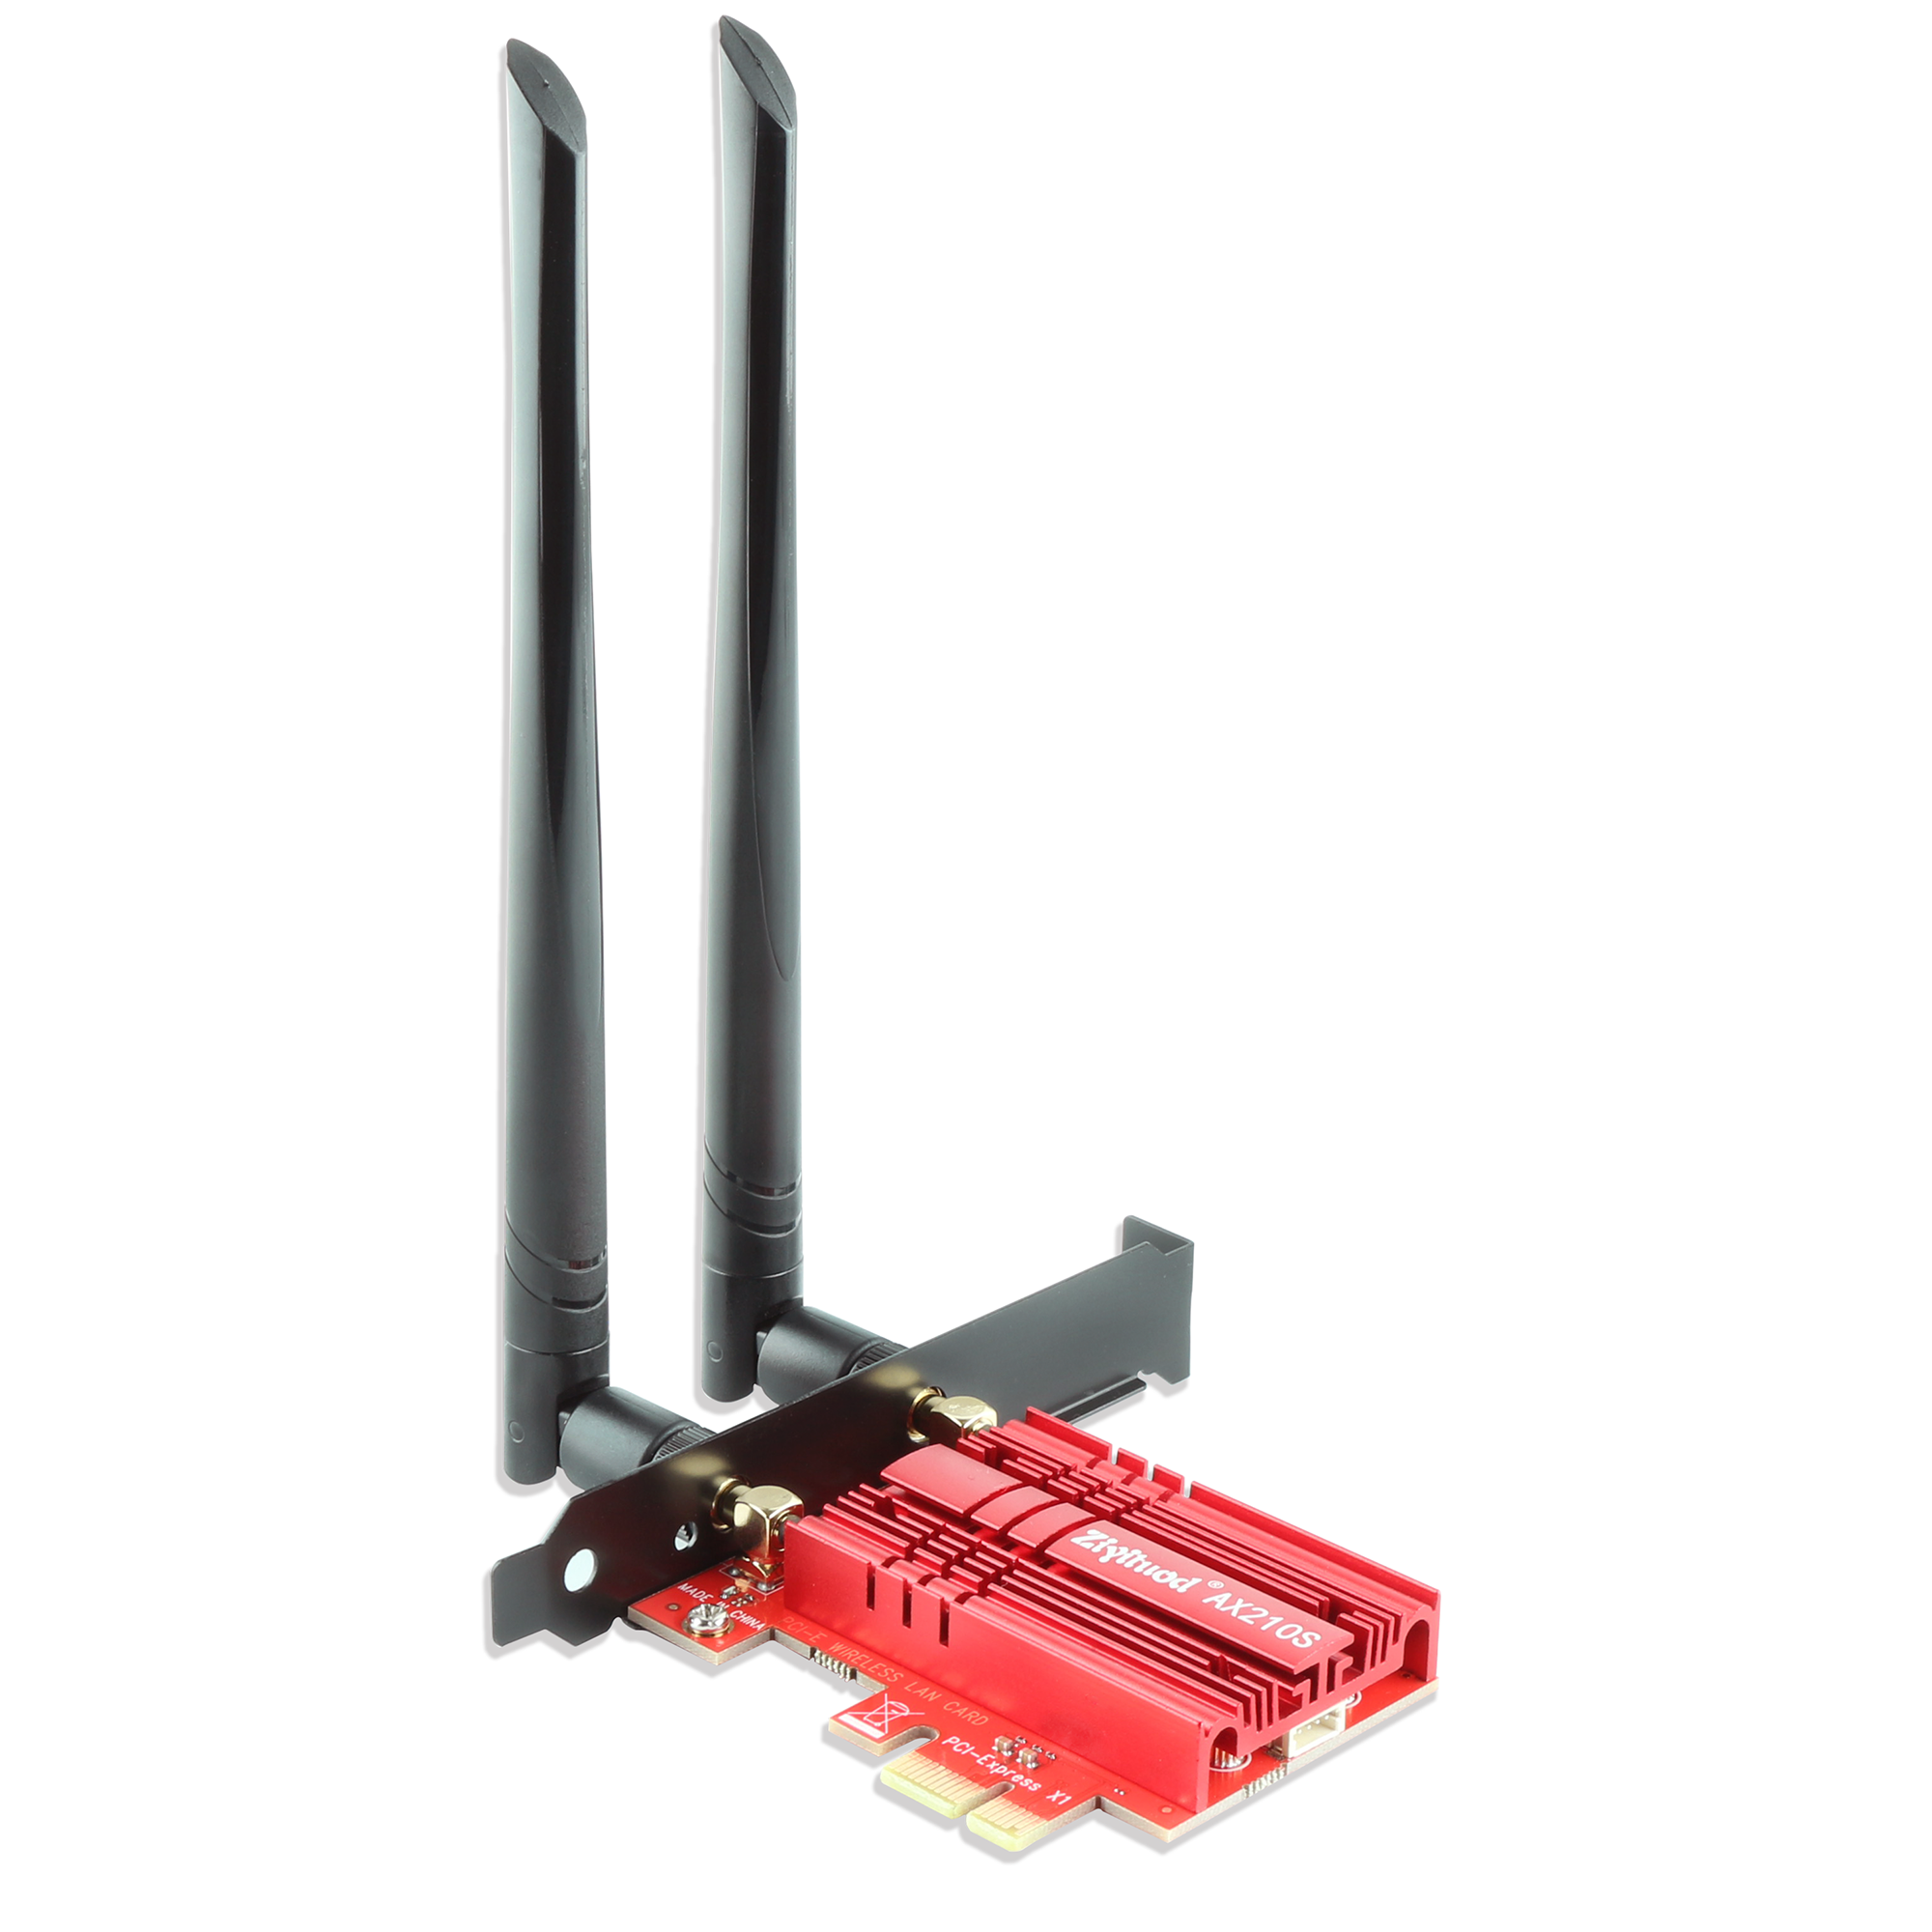 ZYT WiFi 6E AX210 PCIE WiFi Card Expands Wi-Fi into 6GHz | Bluetooth5.2 | Up to 5400Mbps 